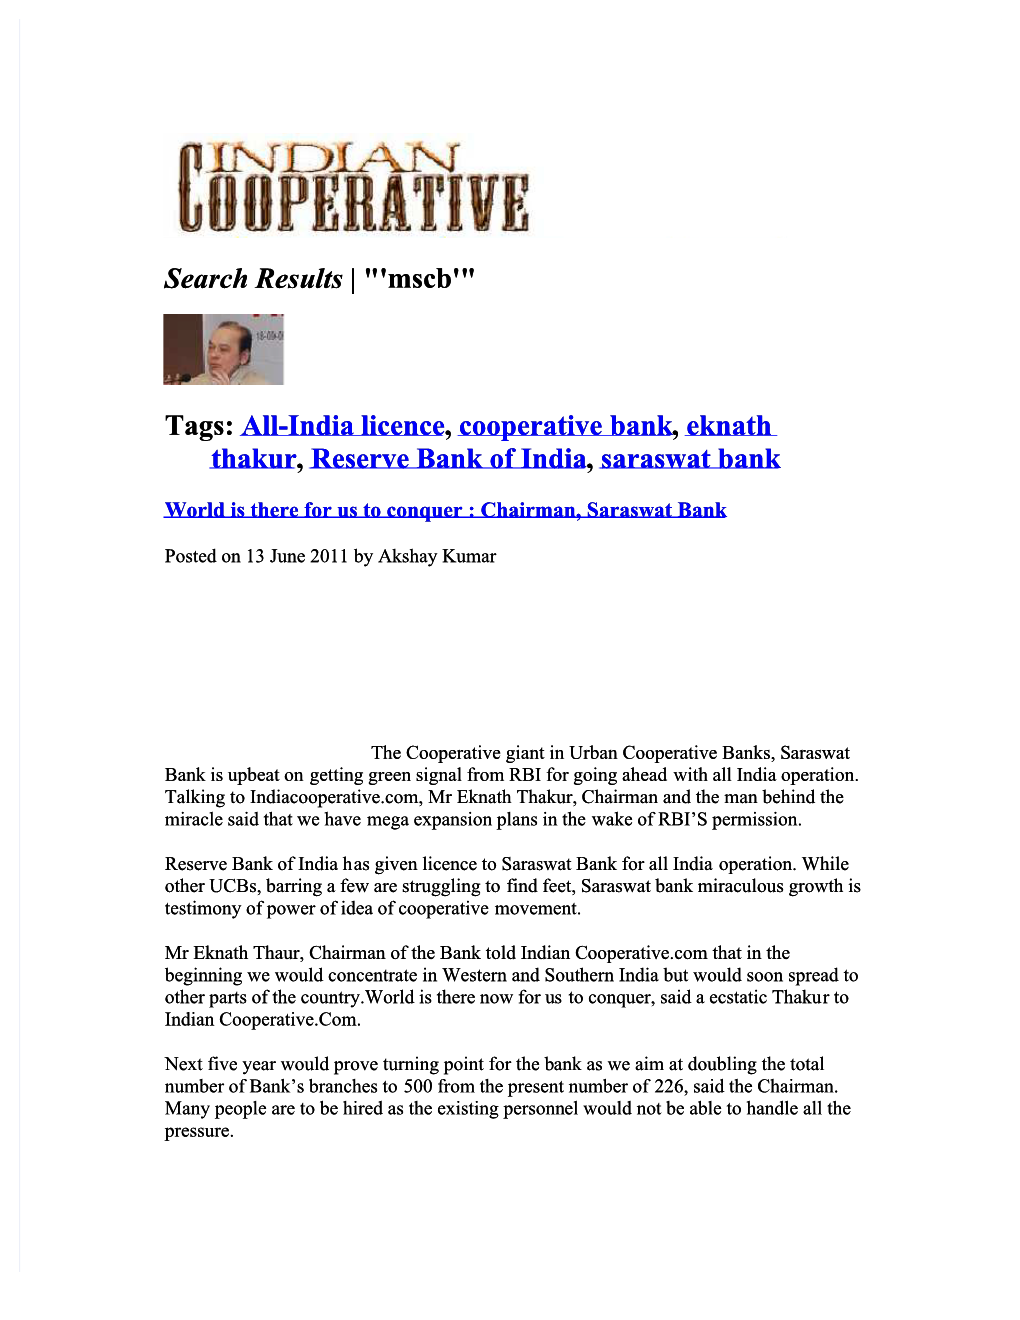 All-India Licence, Cooperative Bank , Eknath Thakur, Reserve Bank Of